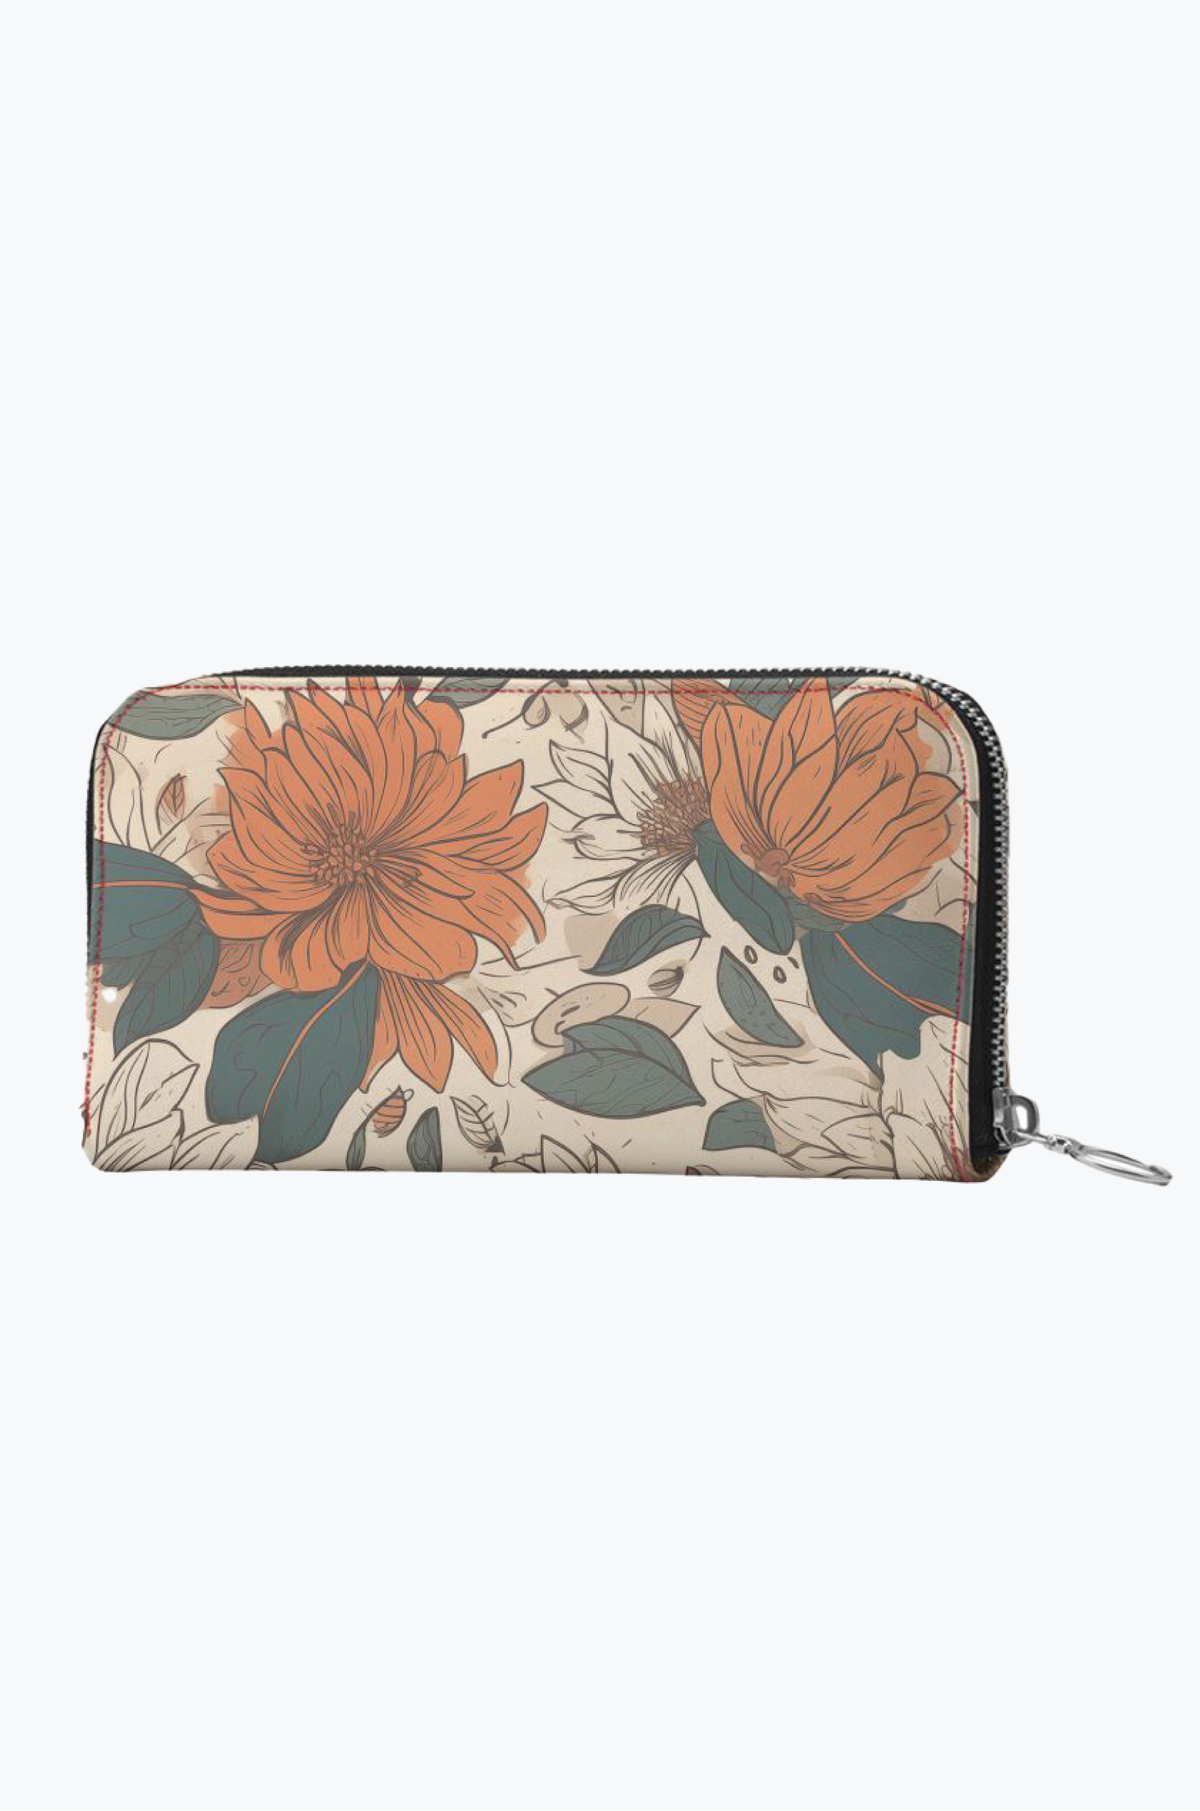 Blush Blossom 100% Leather Wristlet | Hypoallergenic - Allergy Friendly - Naturally Free